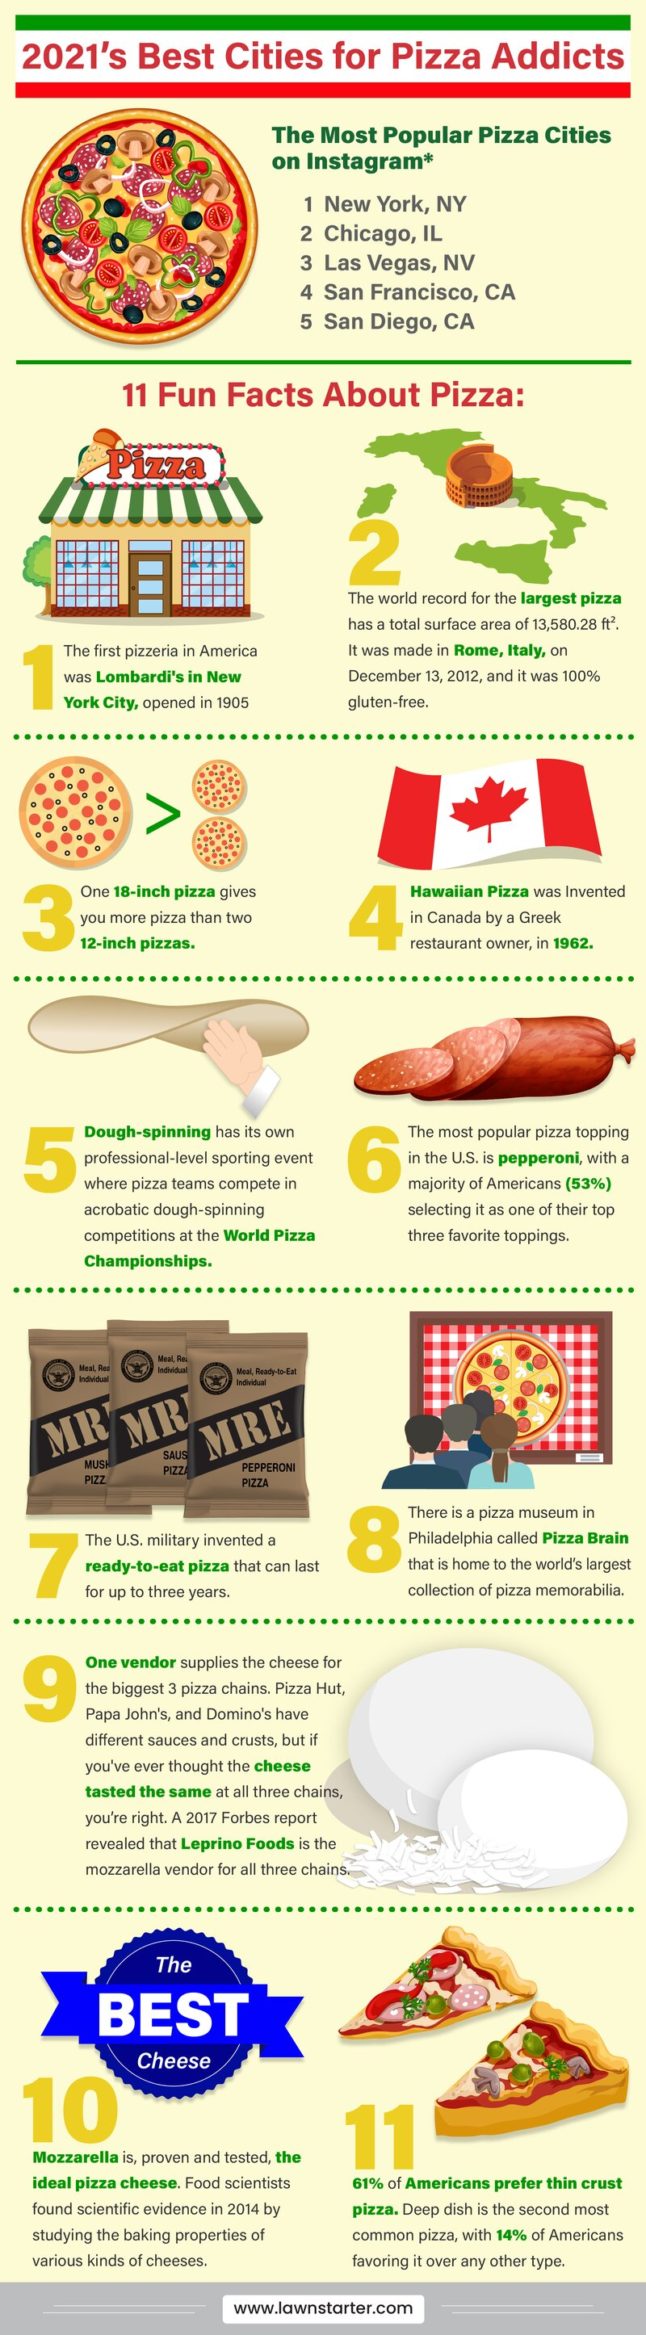 Infographic of Pizza Fun Facts including the first pizzeria in America, the origin of Hawaiian pizza and much more